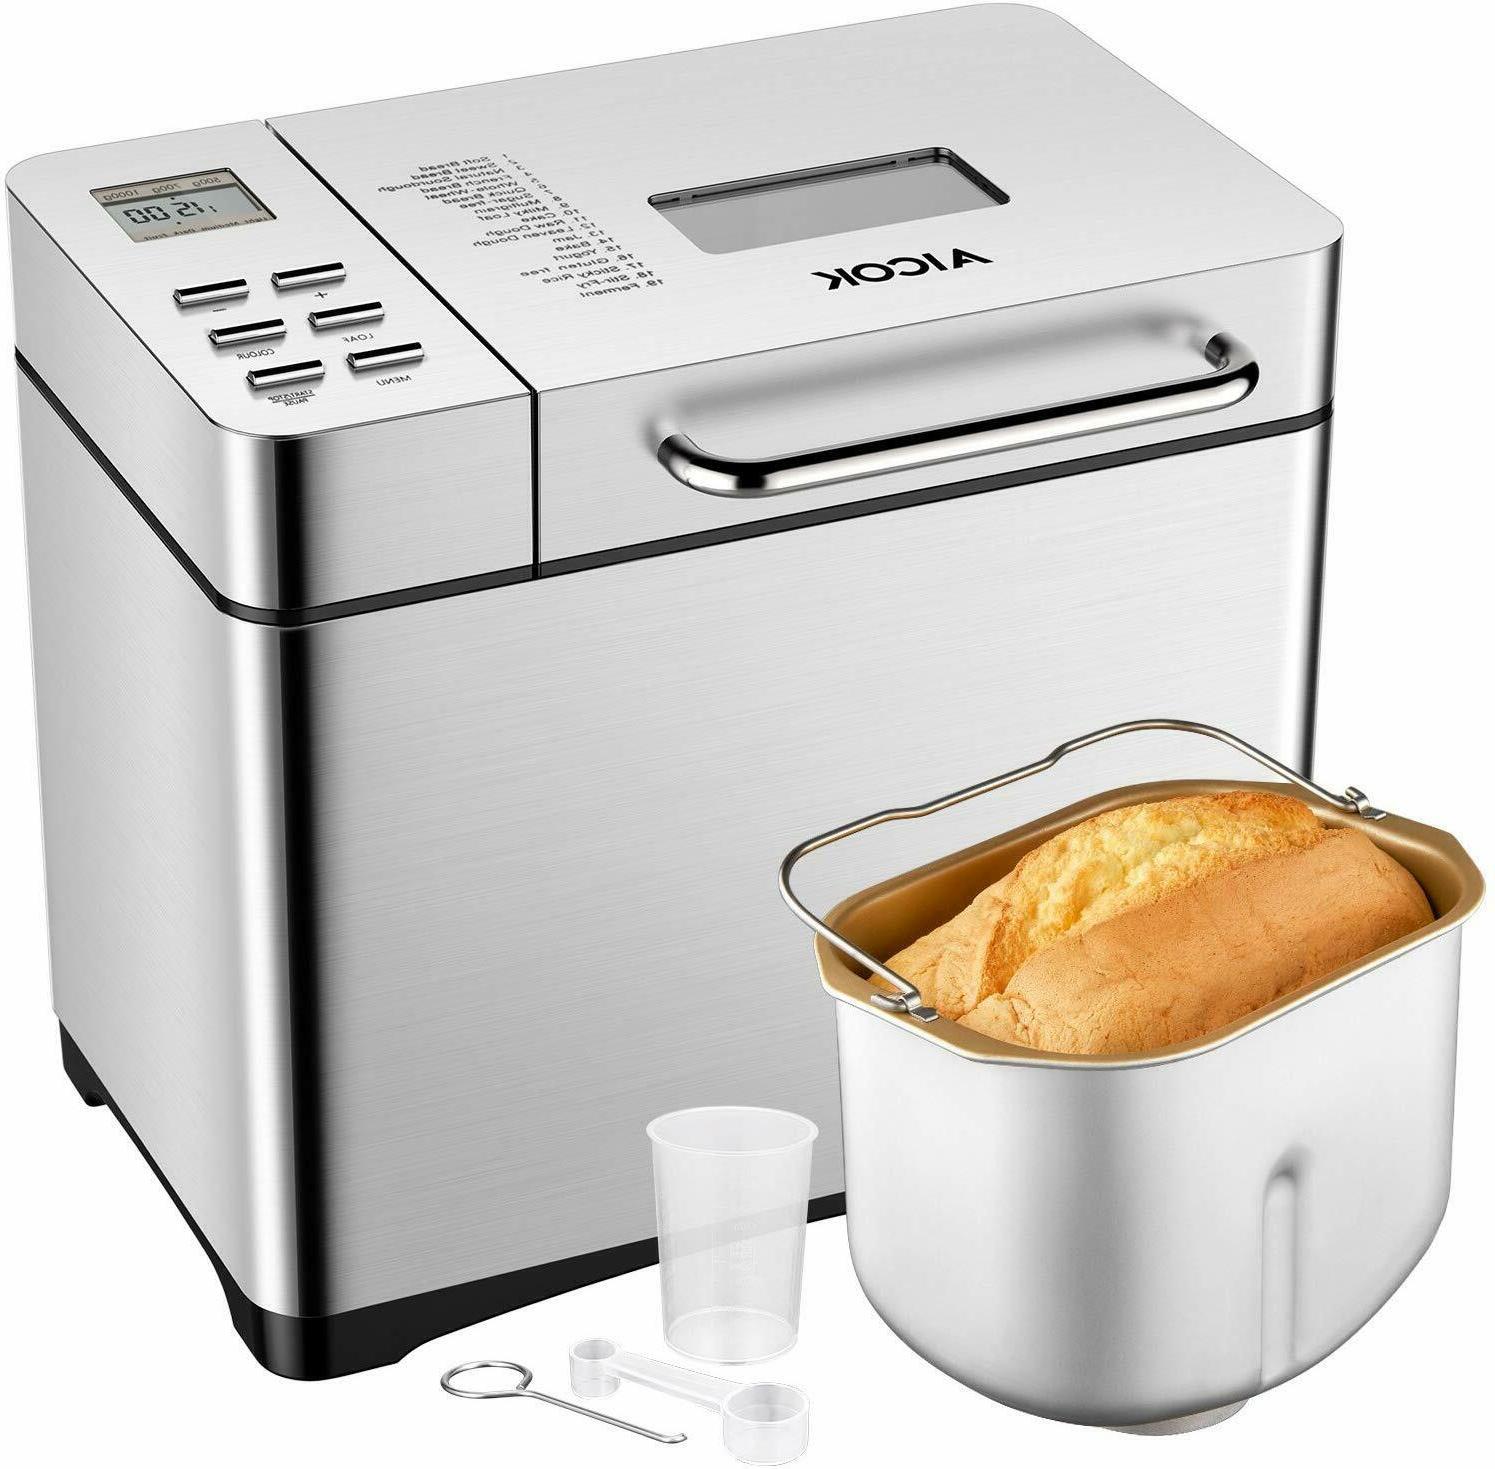 Automatic Bread Maker, Aicok 2.2LB Fully Stainless Steel